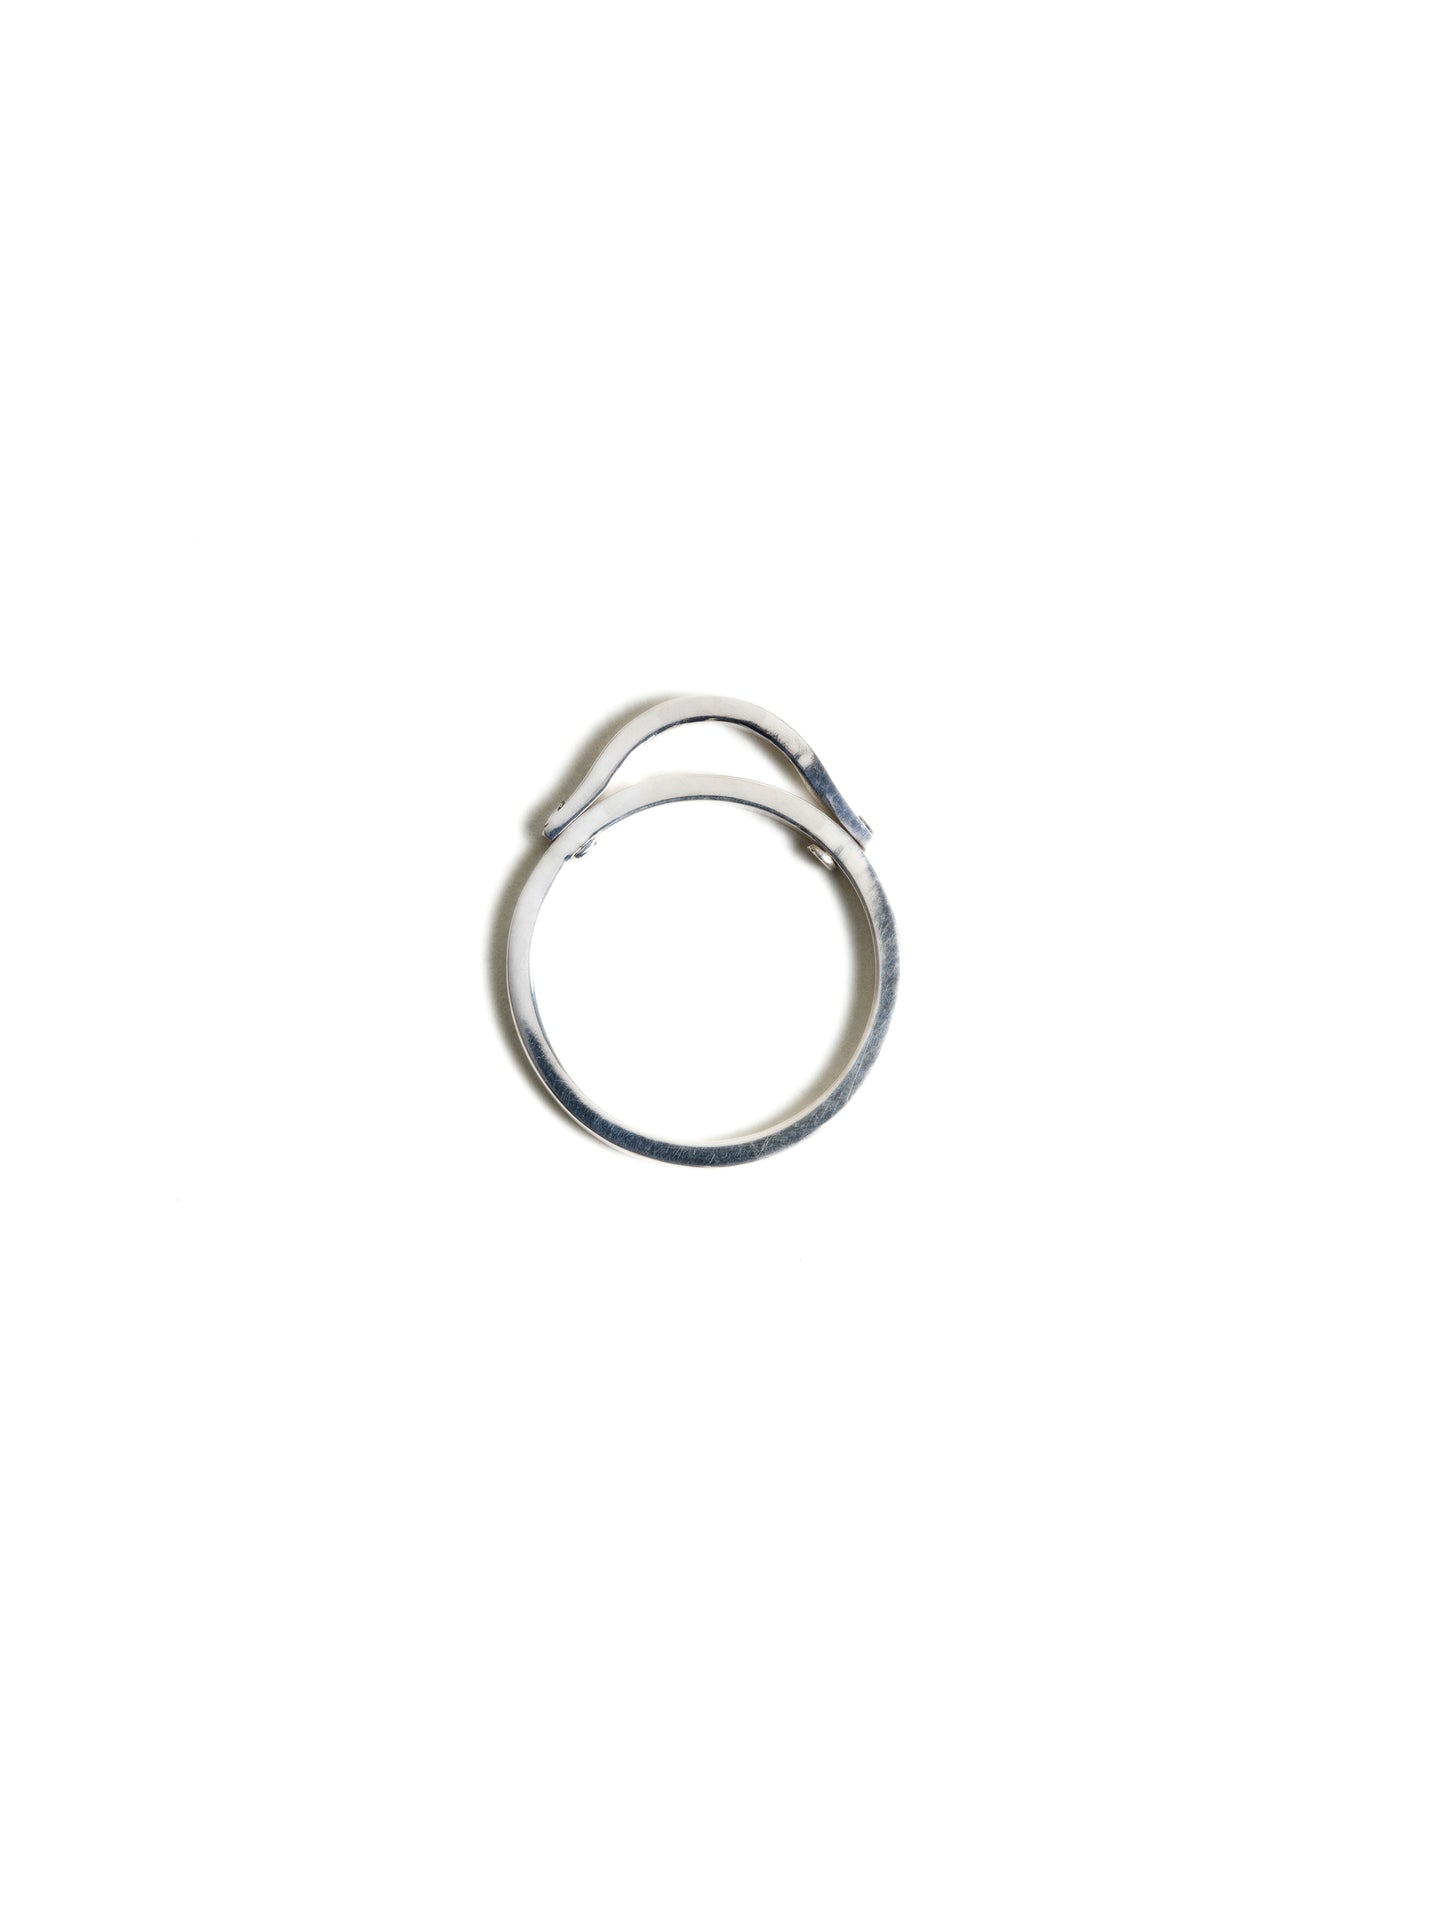 THIN SILVER CURVED RING